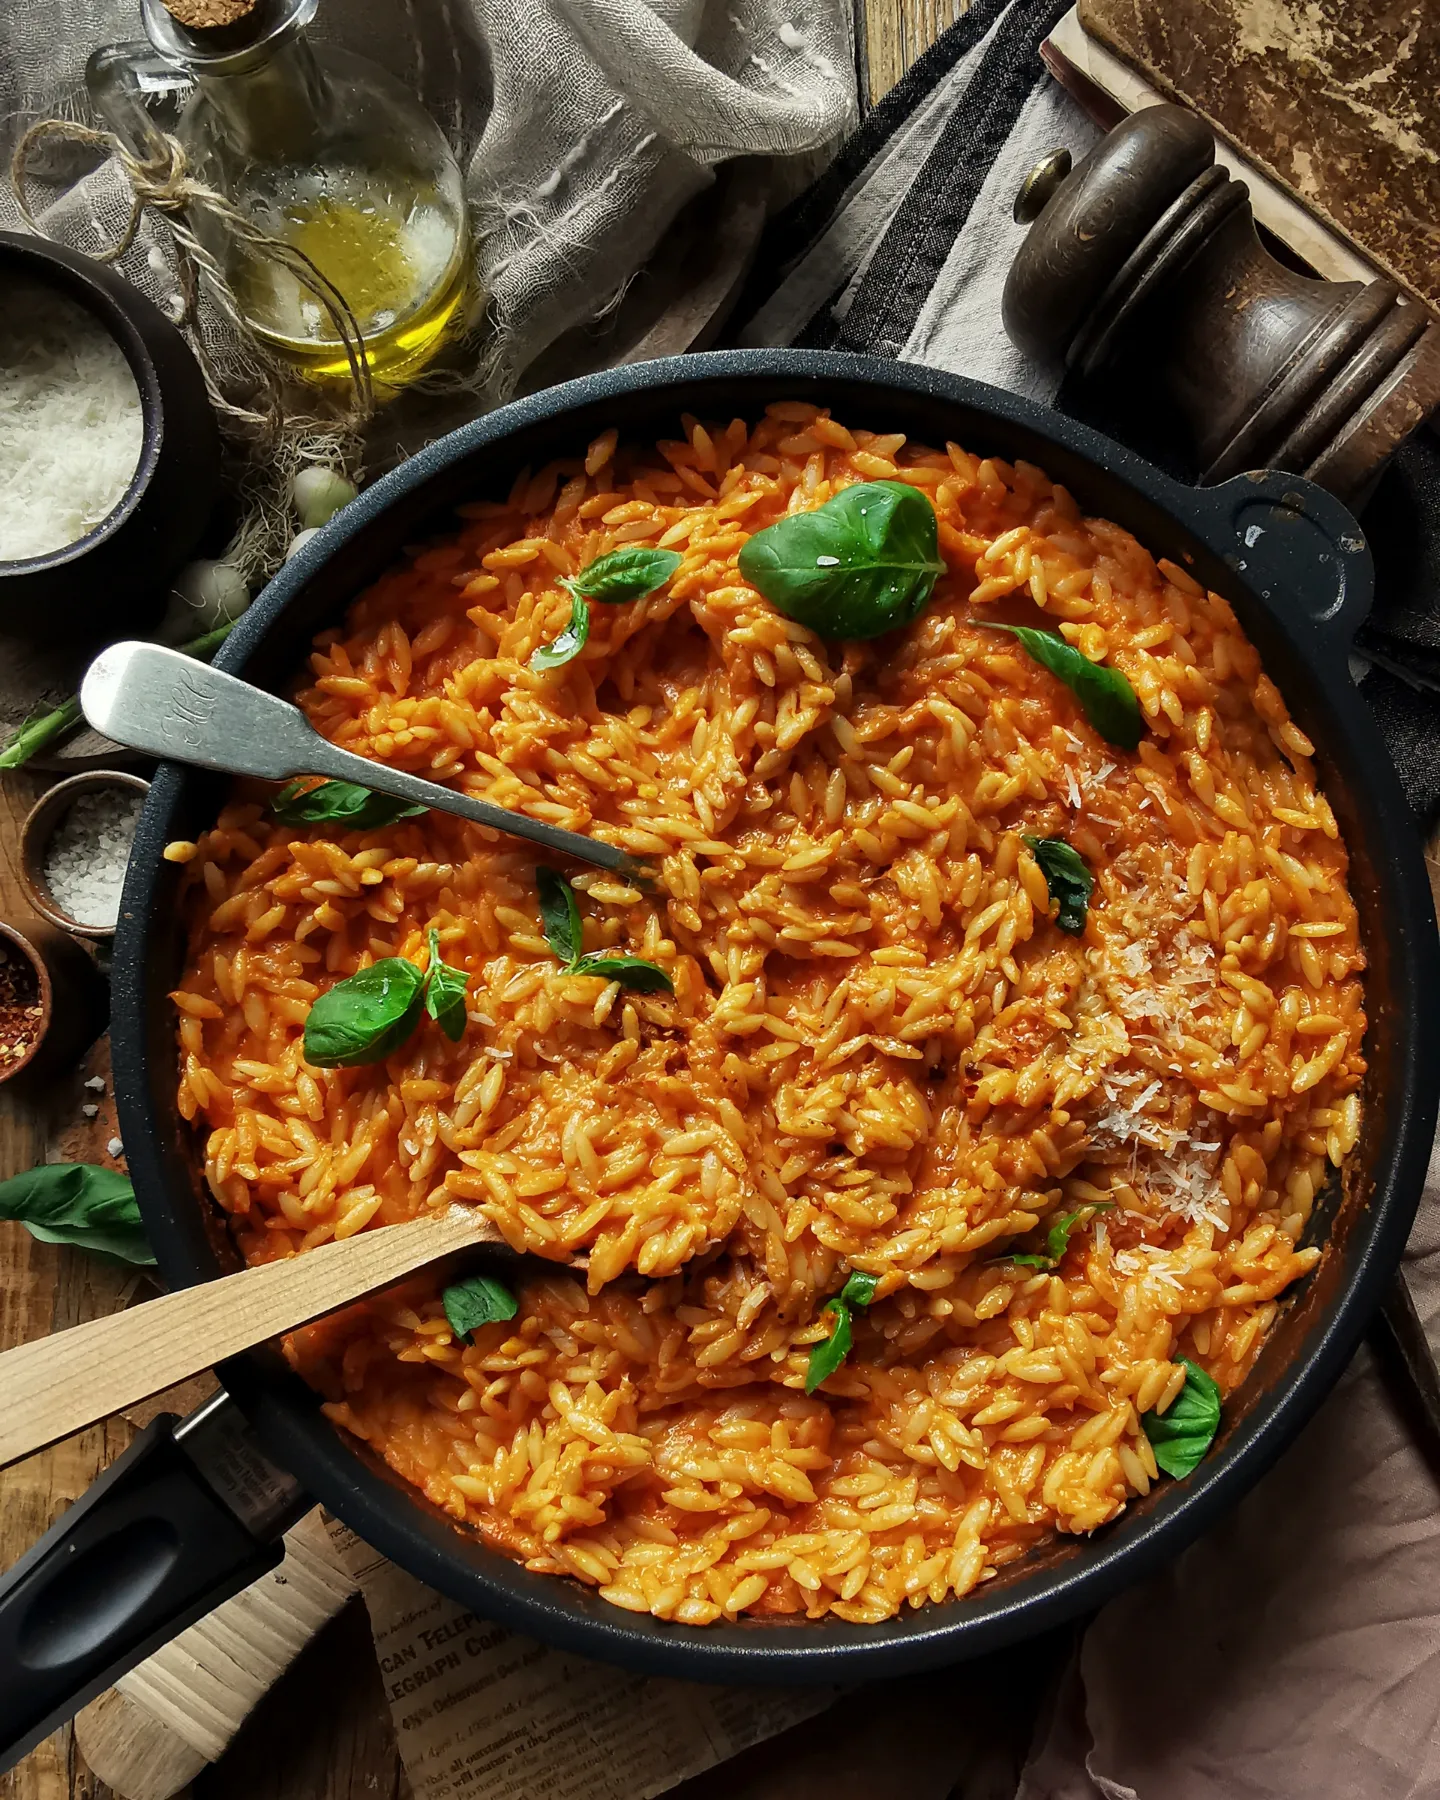 Orzo pasta in creamy roasted yellow and red pepper sauce